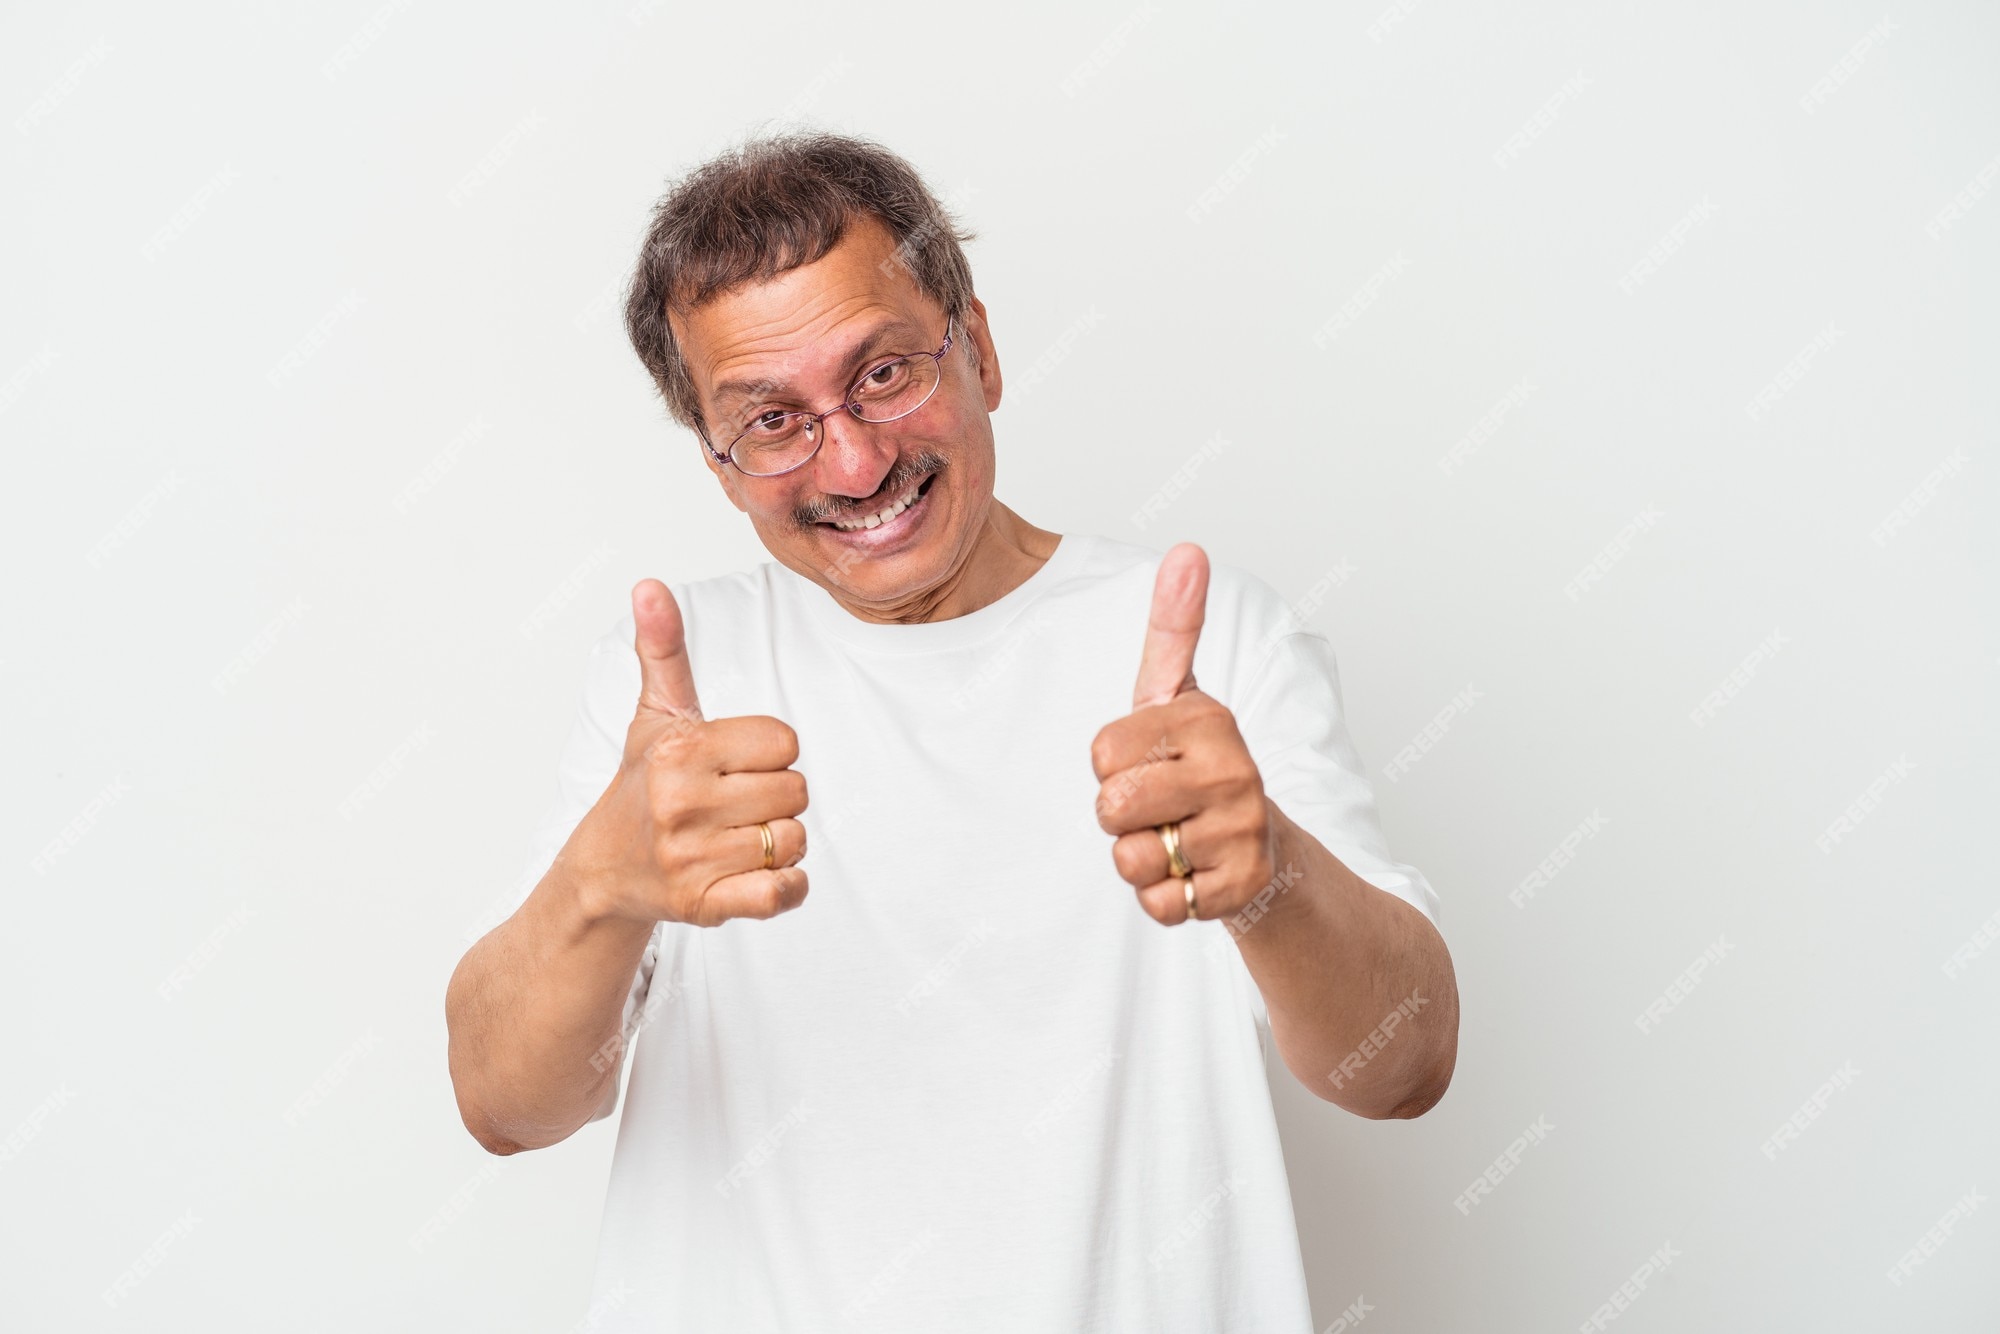 middle-aged-indian-man-isolated-raising-both-thumbs-up-smiling-confident_1187-163251.jpg